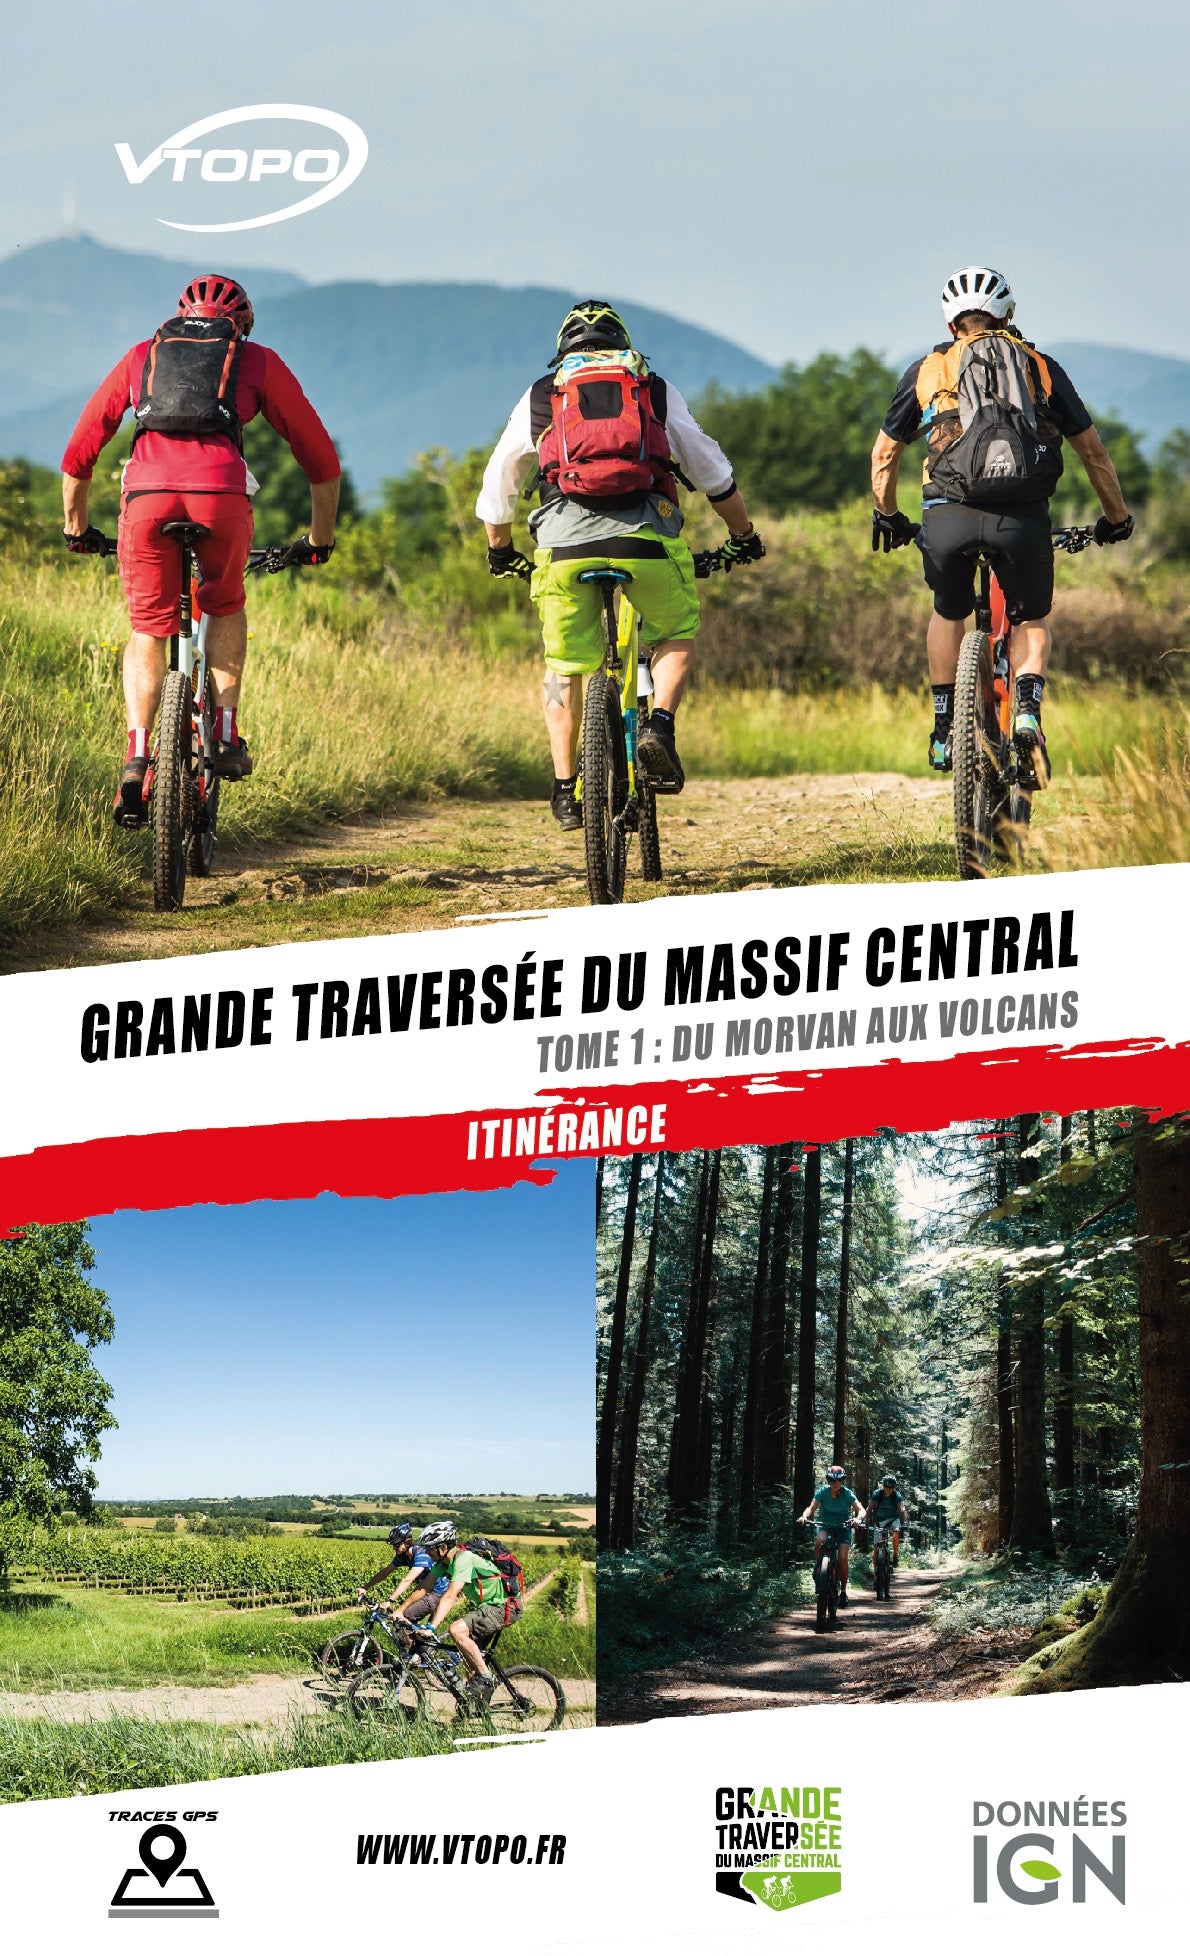 VTOPO MTB Roaming Great Crossing of the Massif Central - Volume 1 - 2nd edition